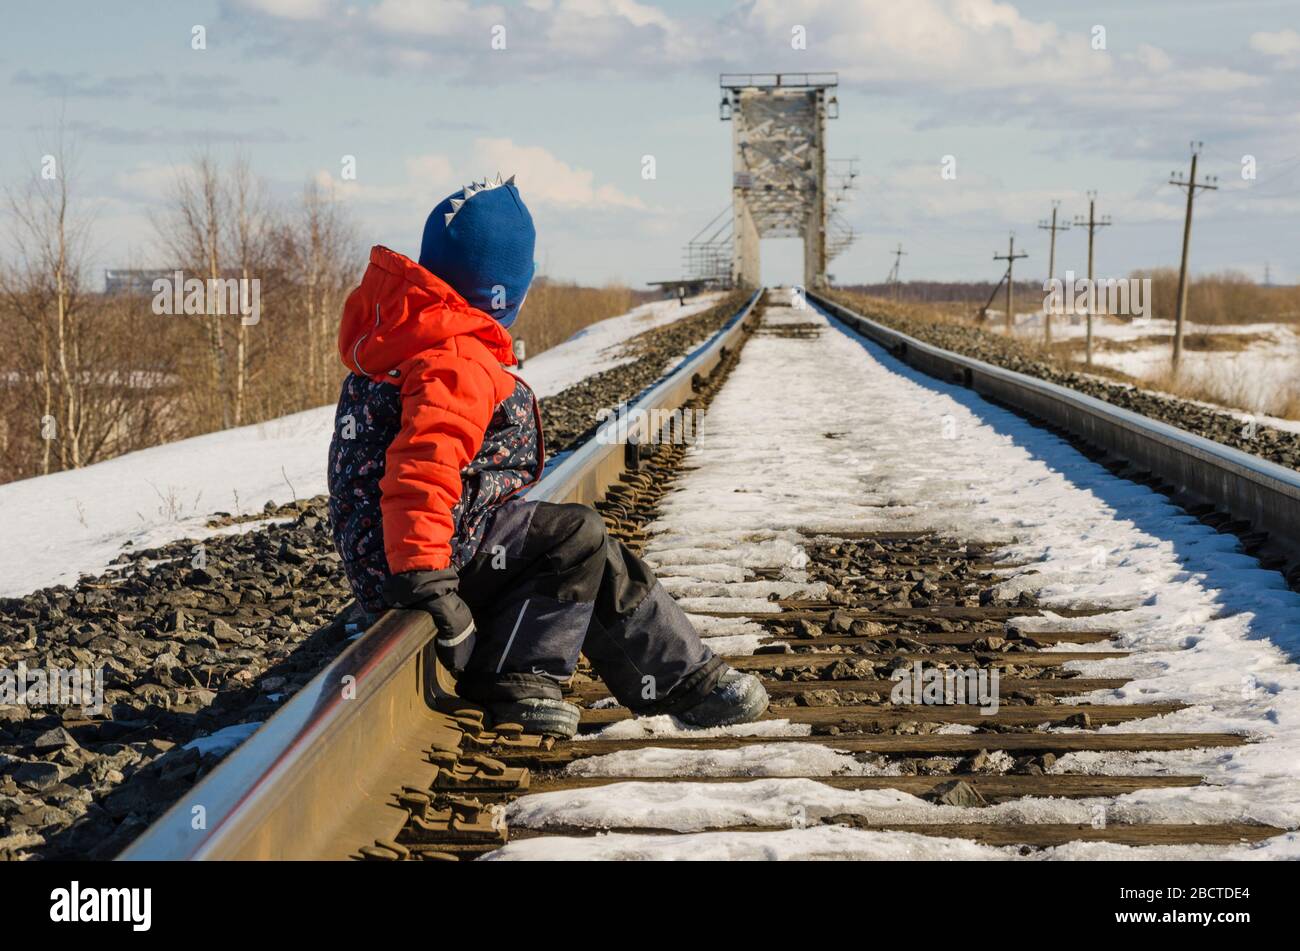 The kid is sitting on the rails of the railway. Waiting for train Stock Photo